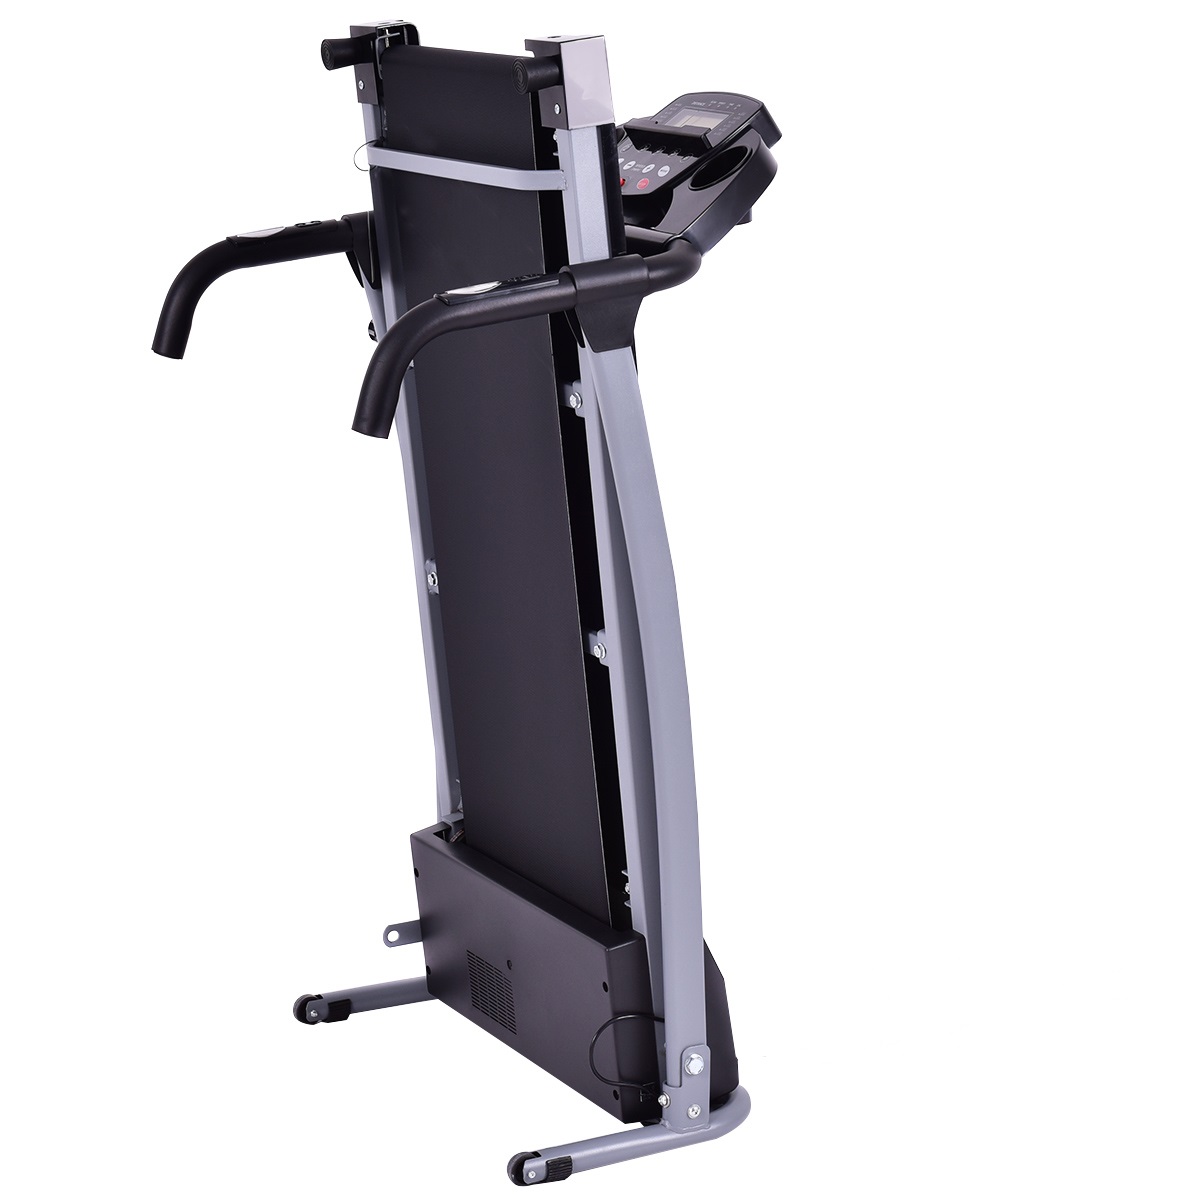 Topbuy 800W Folding Electric Exercise Treadmill Fitness Running Machine - image 4 of 6